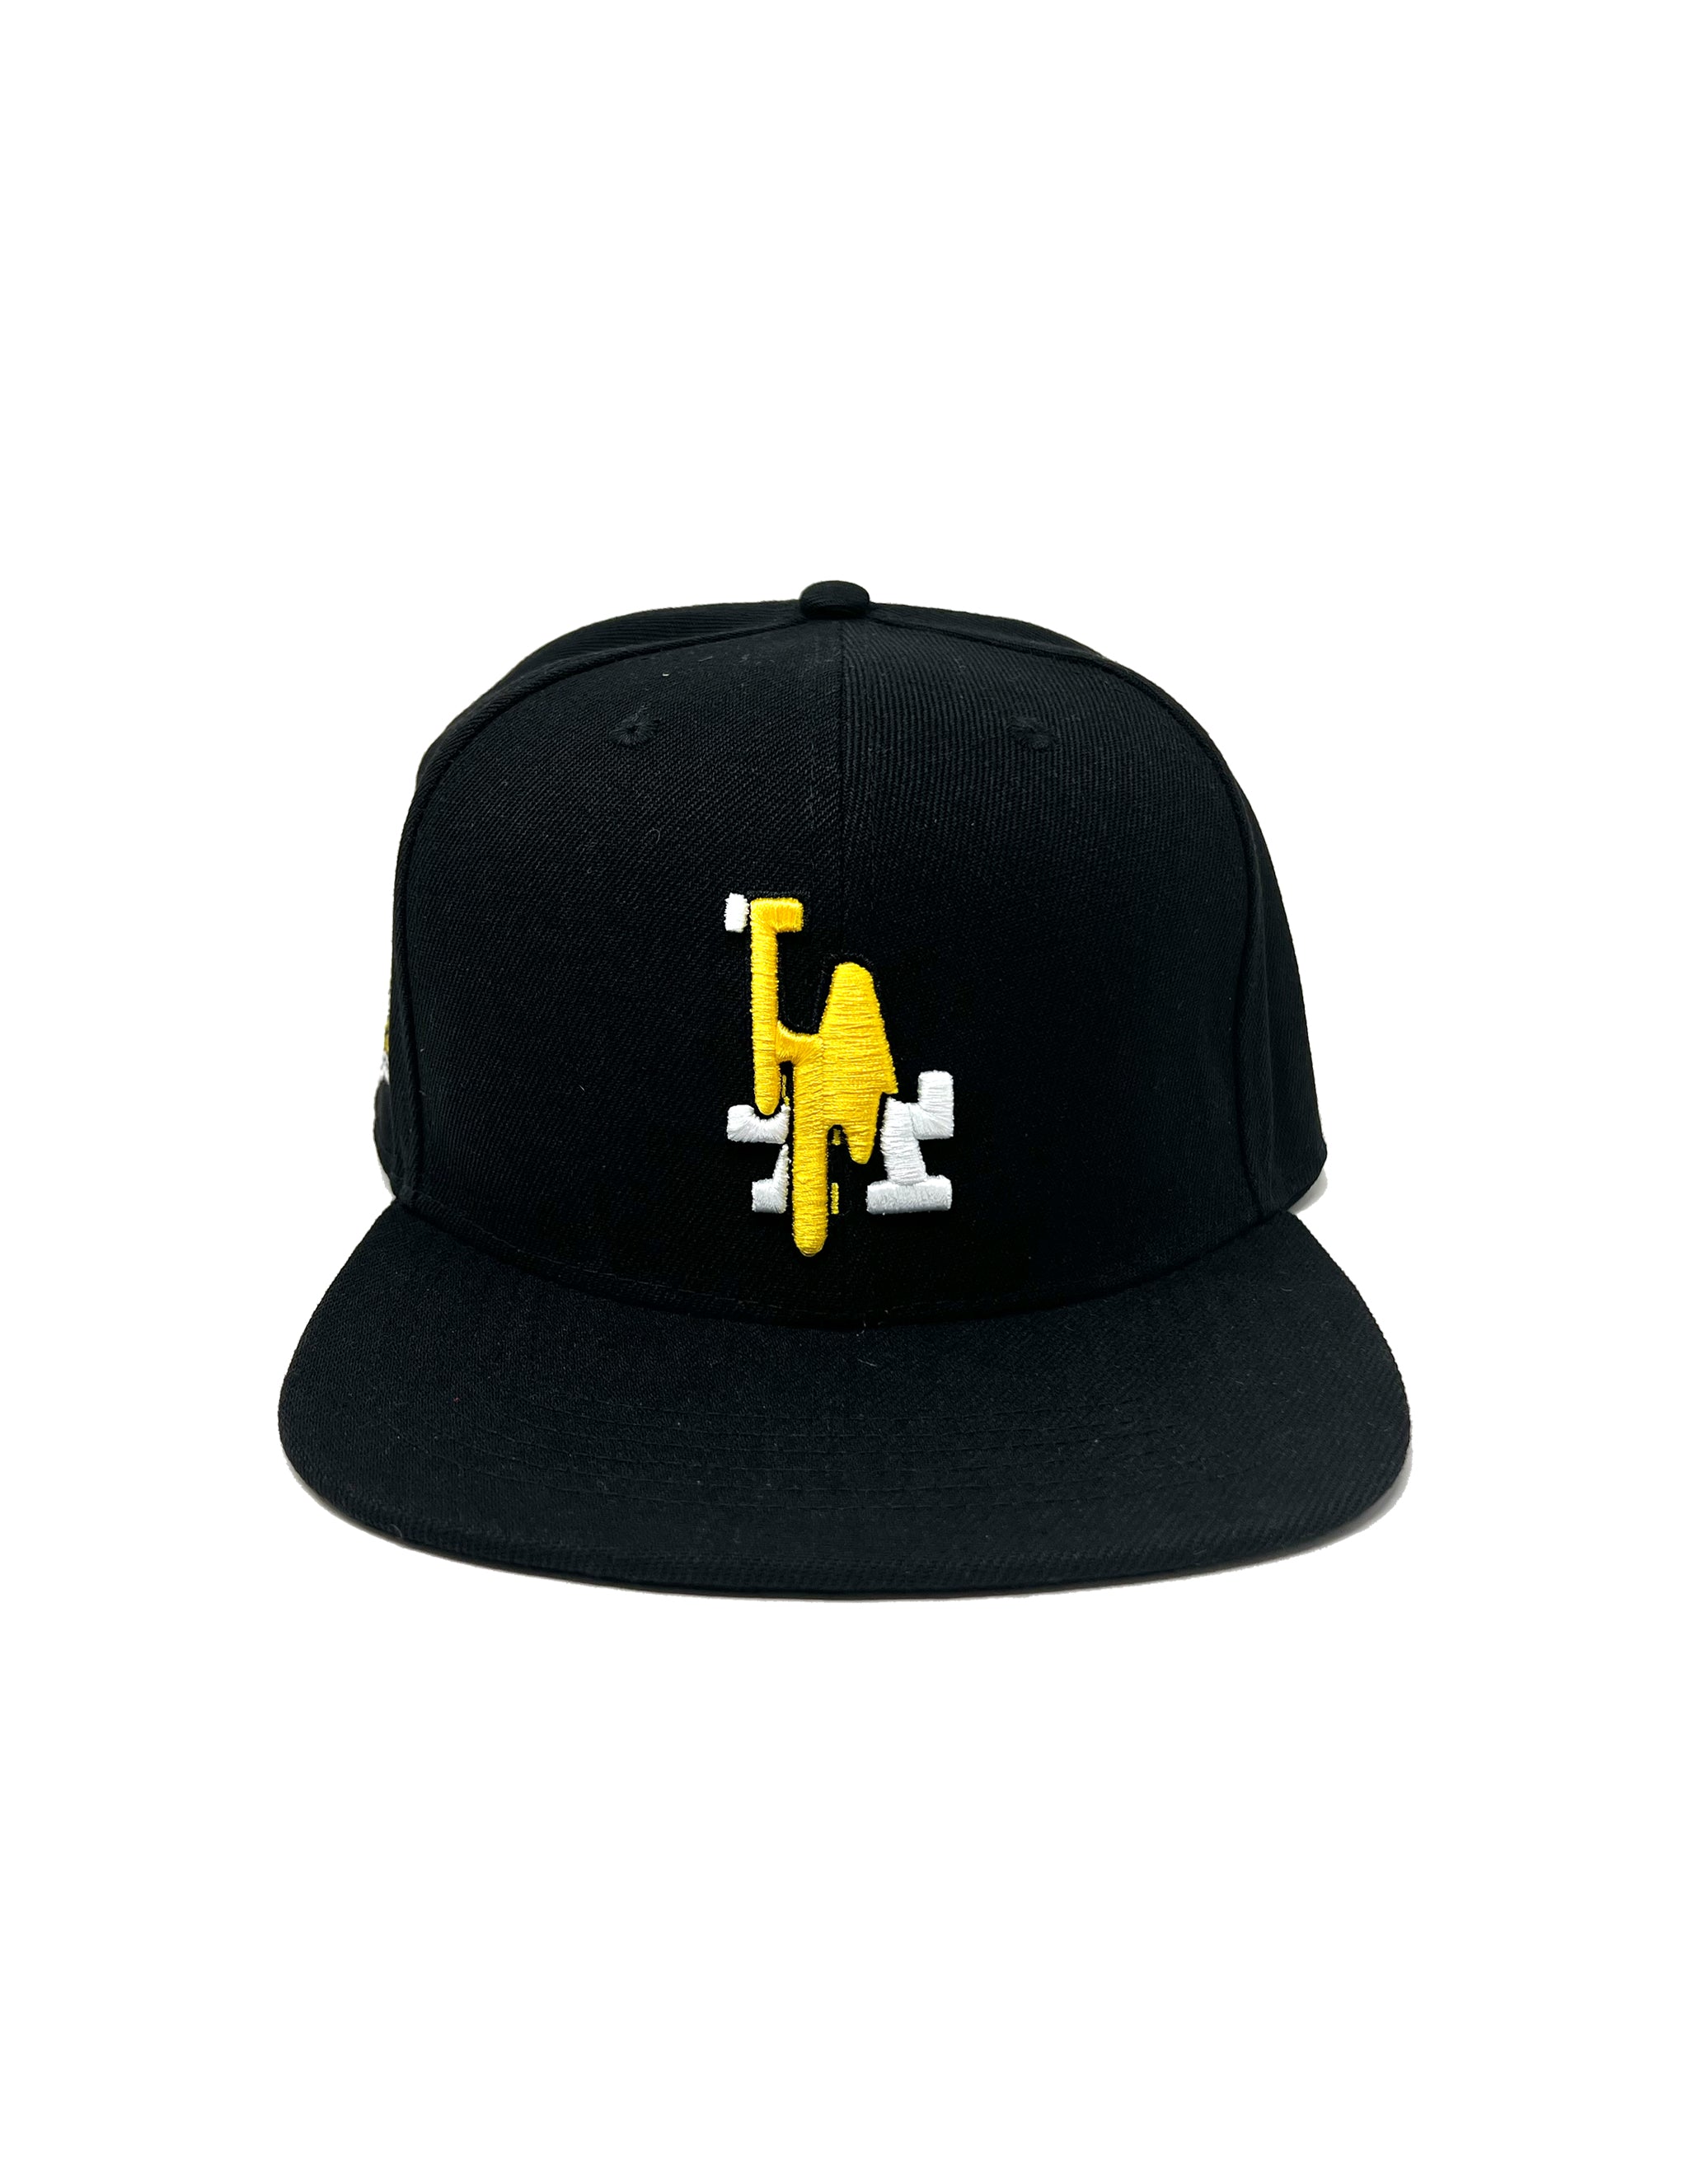 LA Drip Fitted Hat